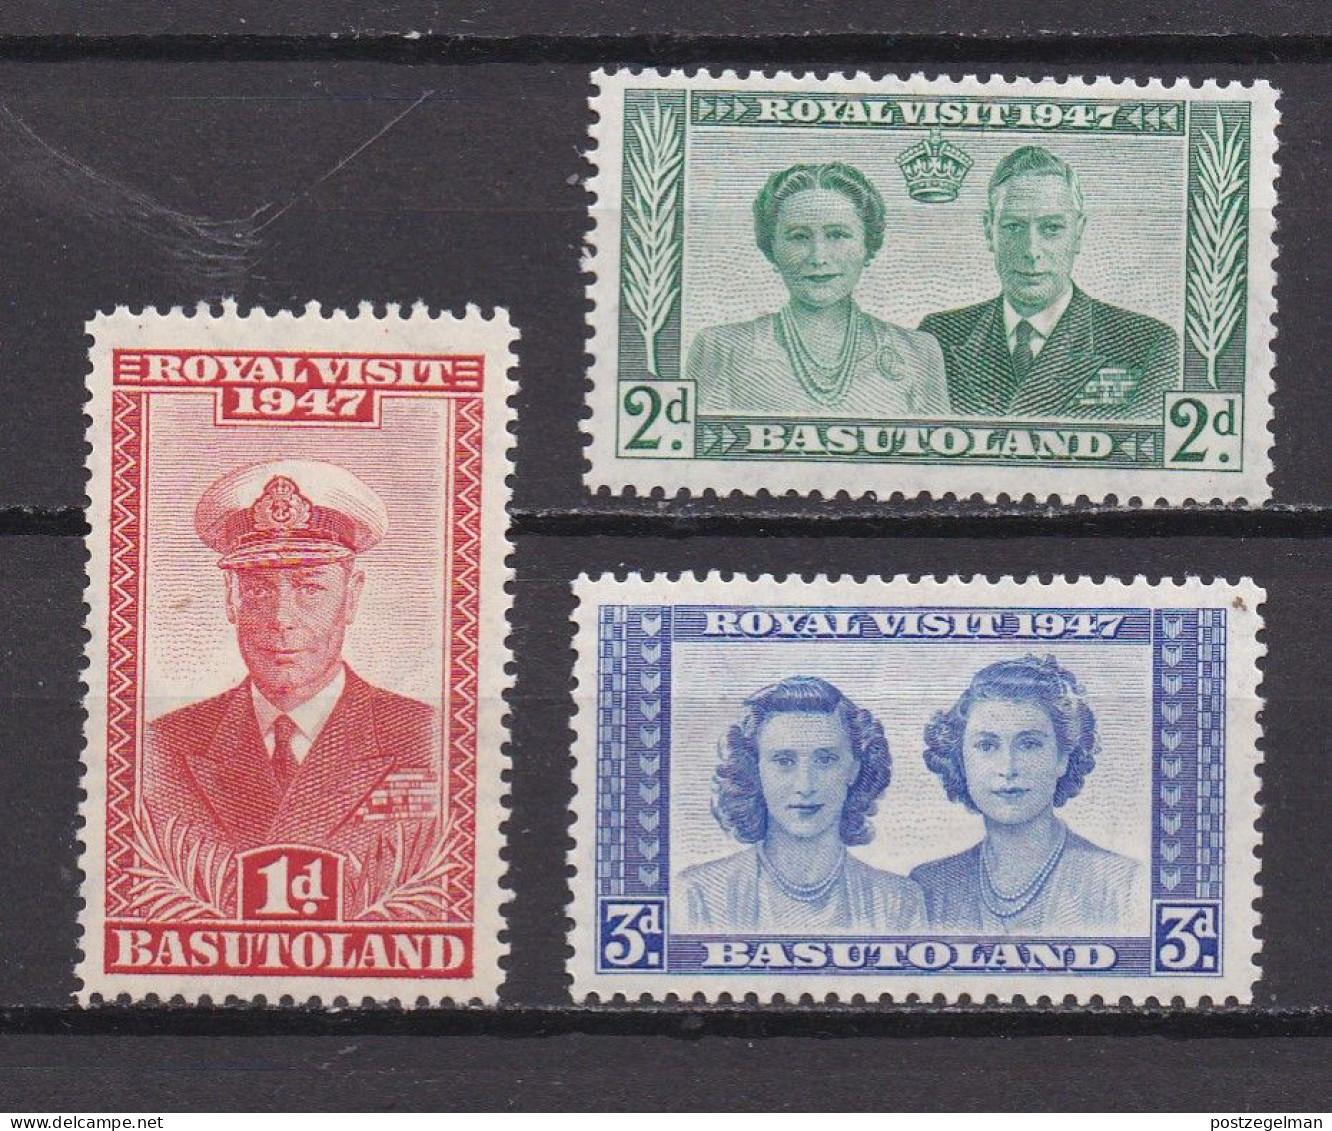 BASUTOLAND 1947 Mint Hinged Stamp(s) Royal Visit 35=38 (3 Values Only, ( Not A Complete Serie) - 1933-1964 Colonie Britannique